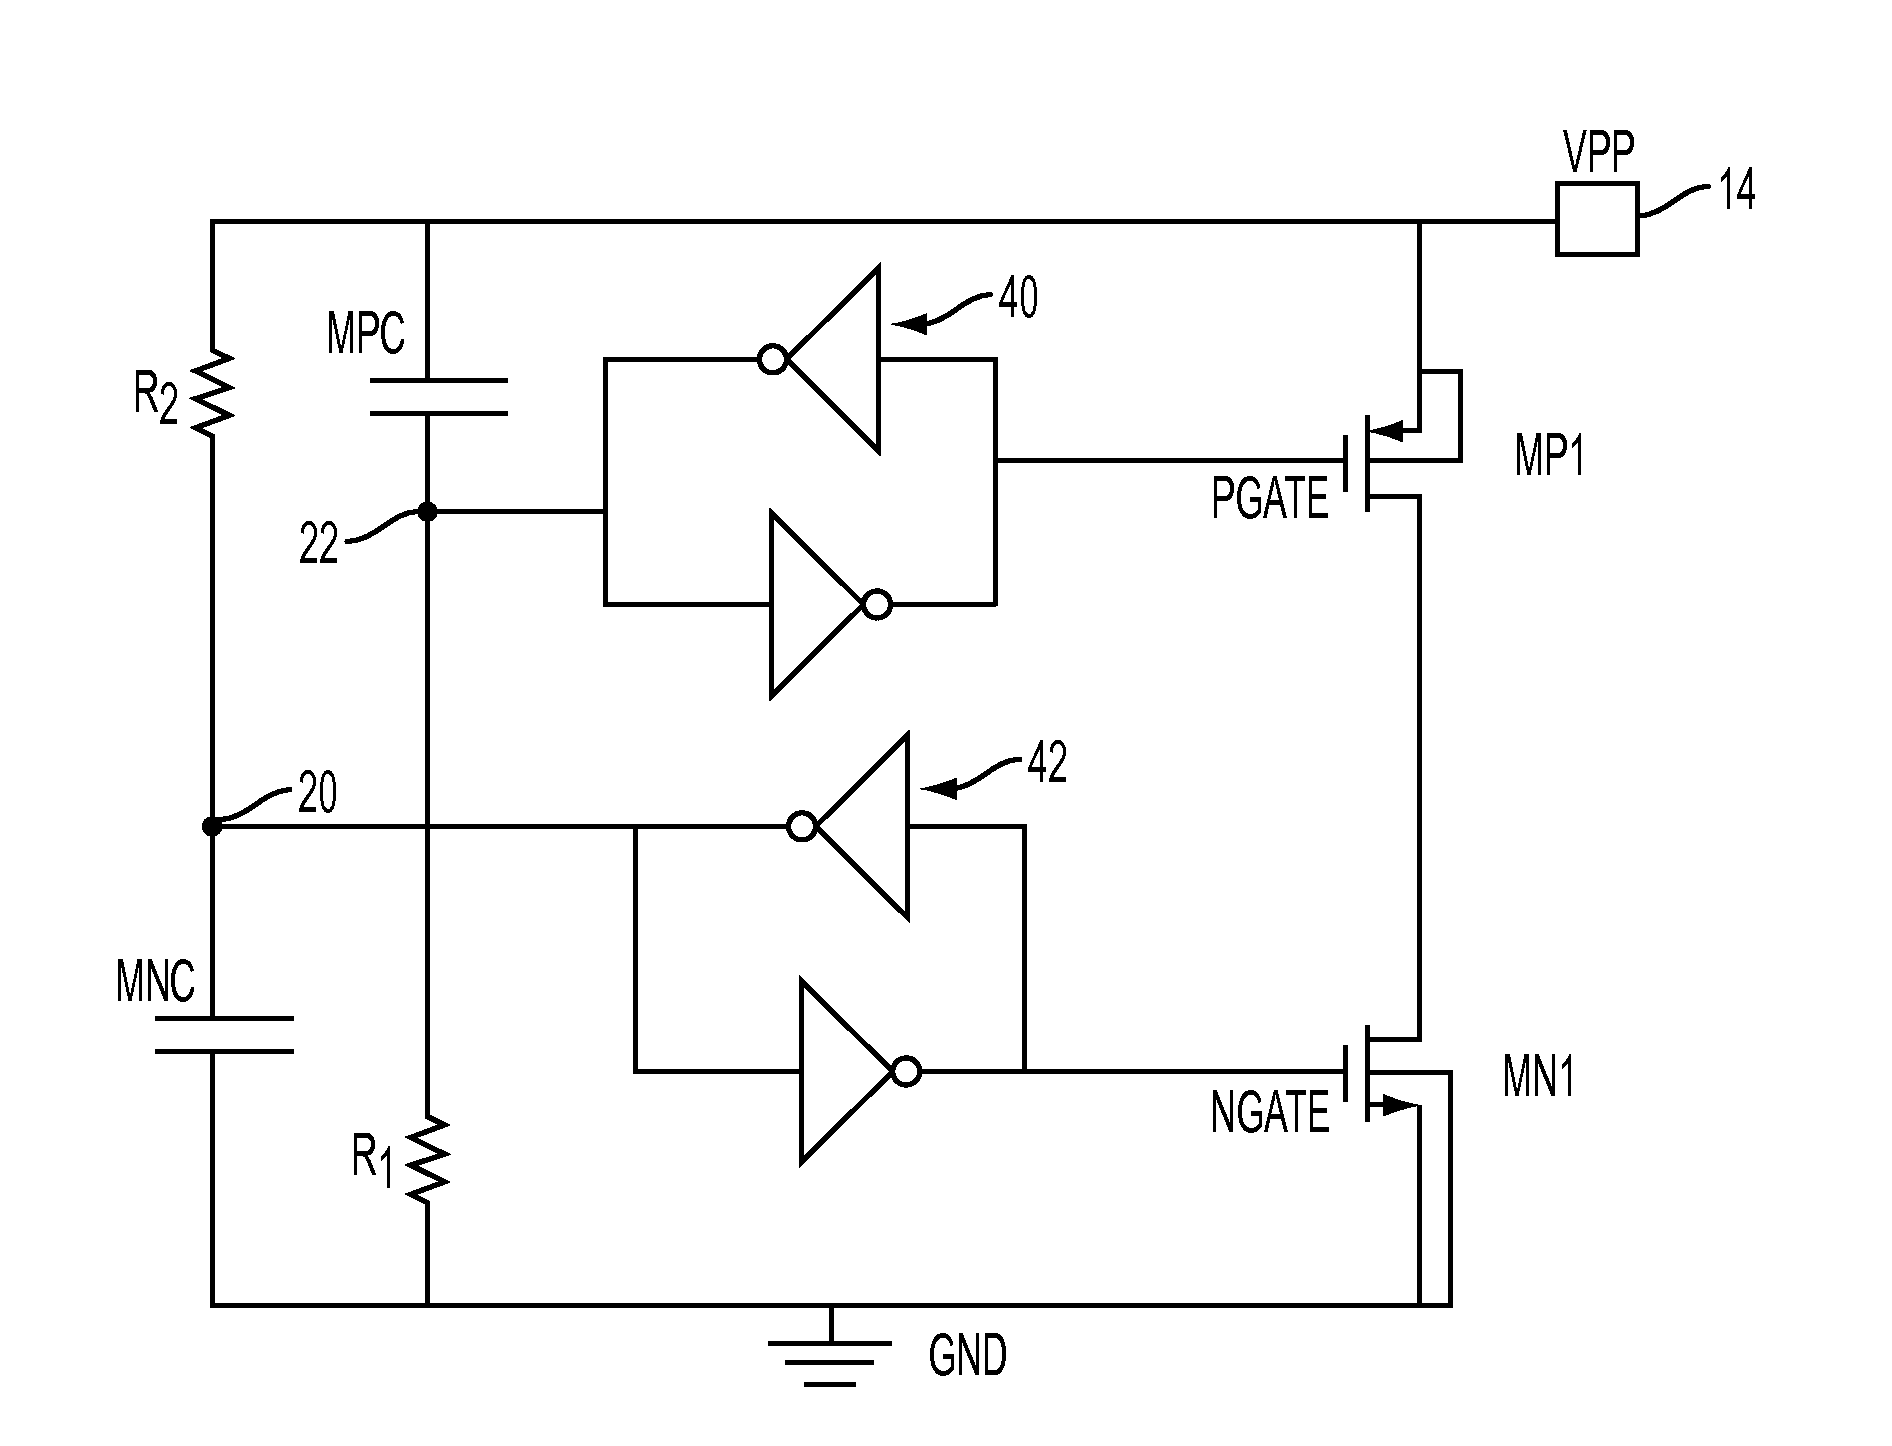 Power clamp for high voltage integrated circuits